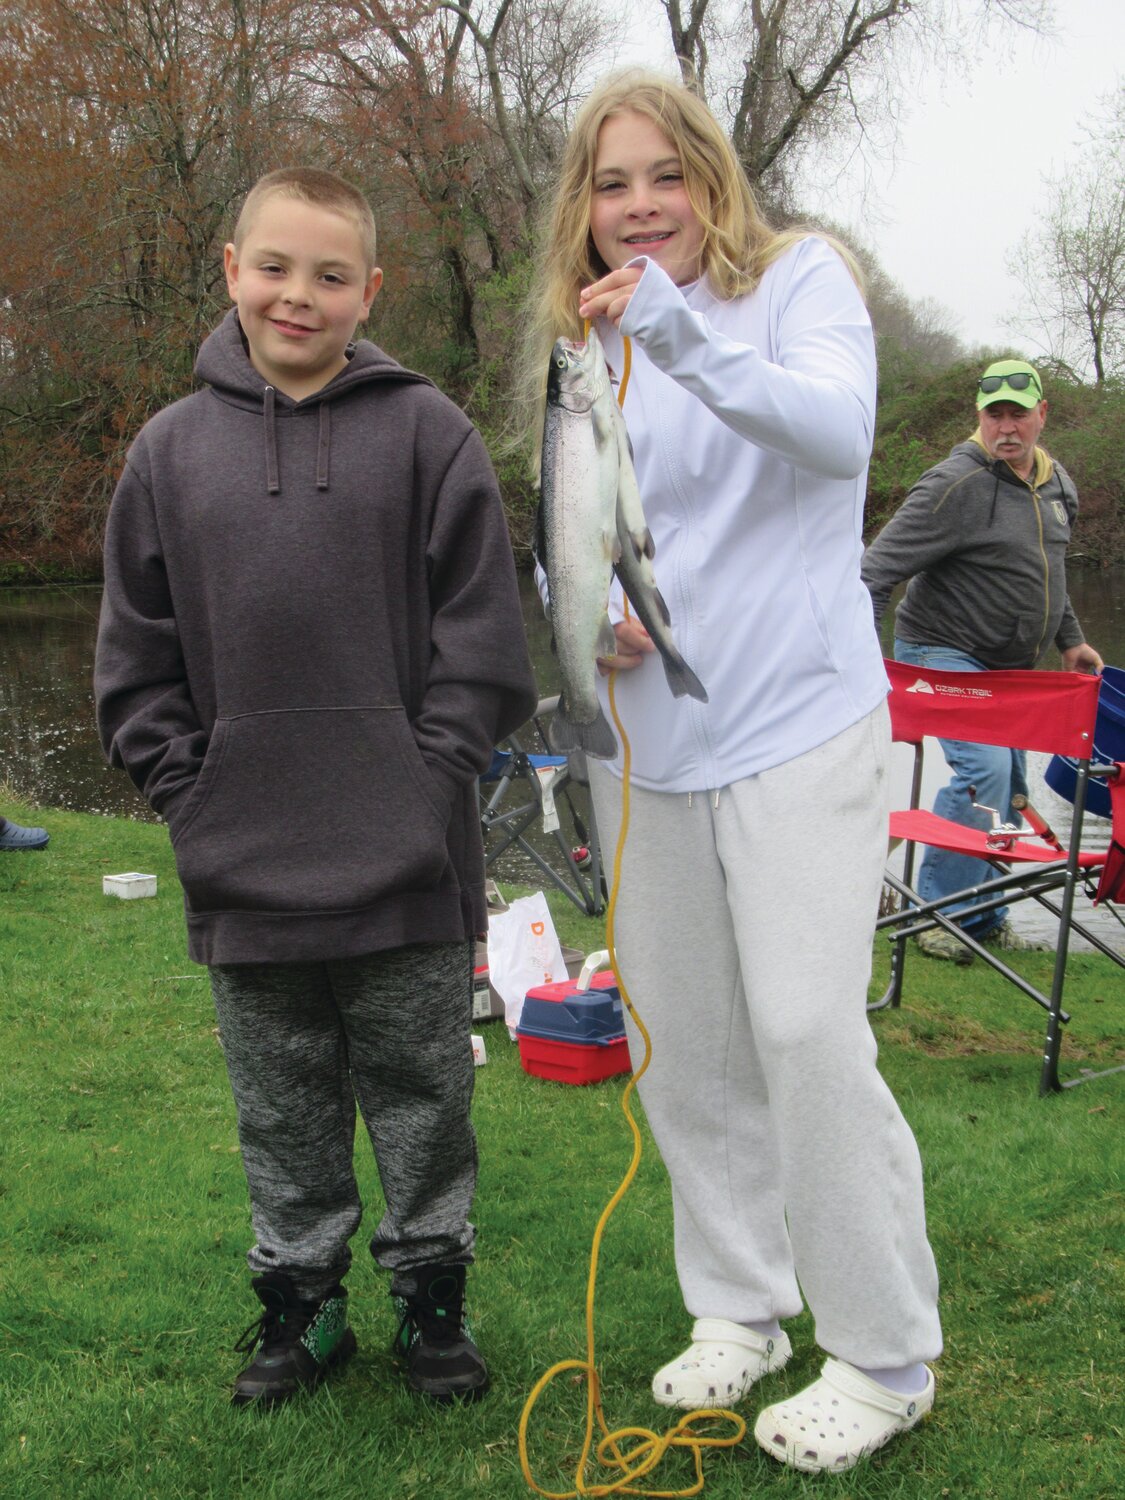 AWESOME ANGLERS: Lana Desroches, 12, who won the Tri-City Elks Kids Fishing Derby with a 16.5-inch catch, is joined by her brother Logan who also caught a 15-inch rainbow trout Sunday at Golden Pond in Warwick. (Warwick Beacon photos by Pete Fontaine)